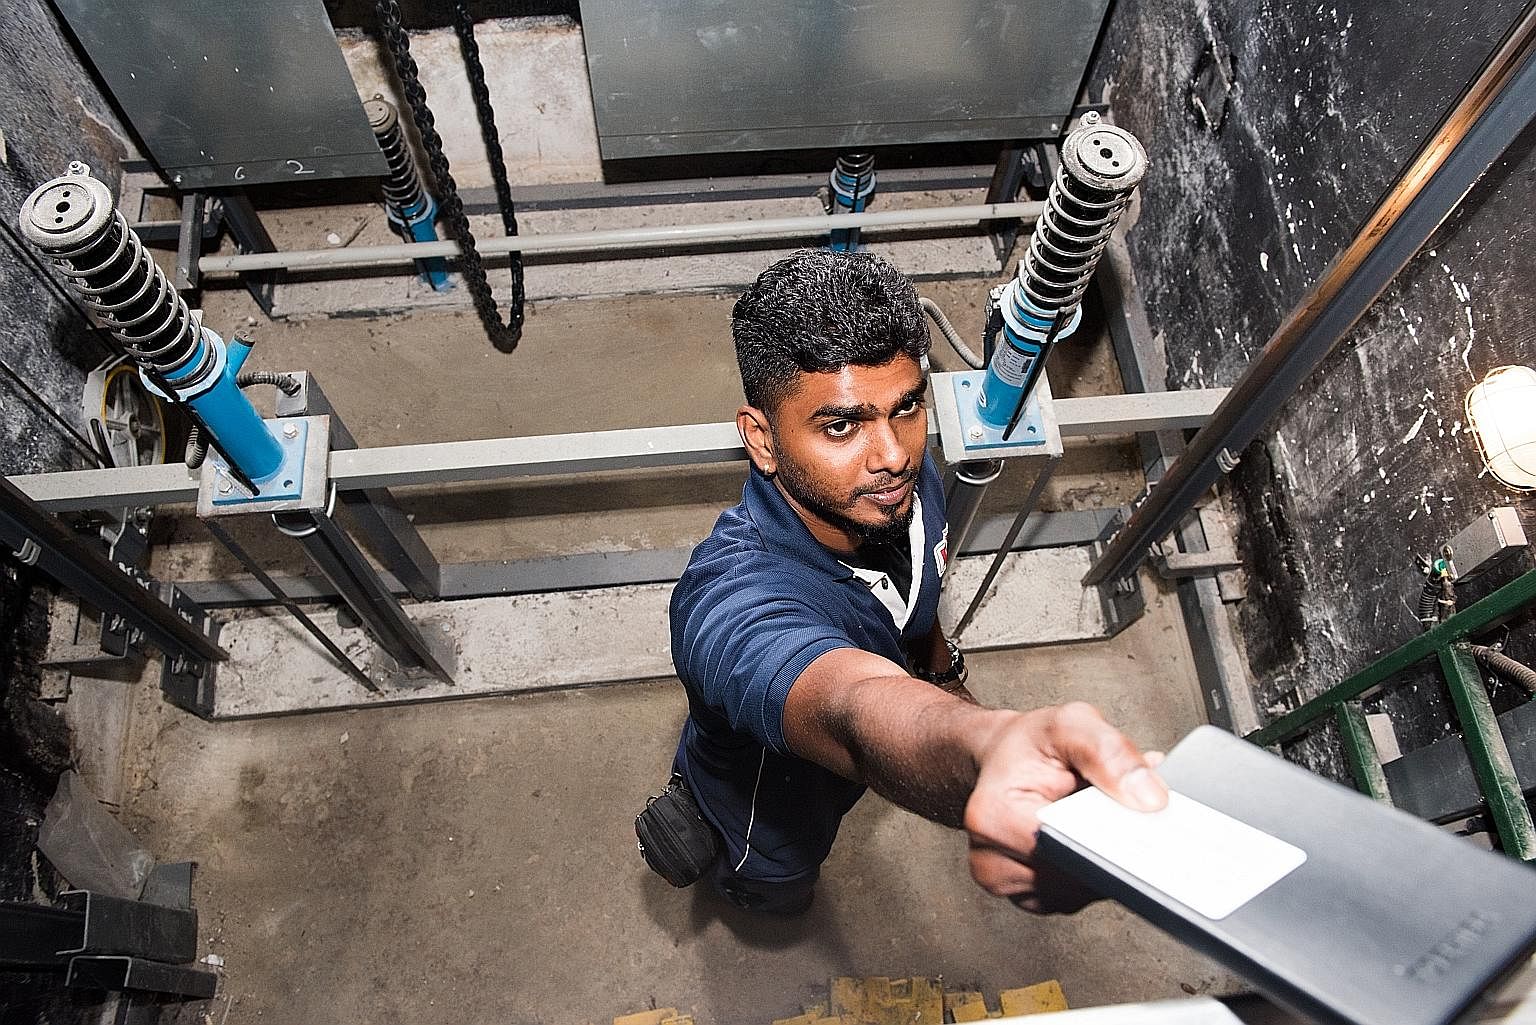 Chevalier lift technician Vinod Balakrishnan was once directed to the wrong lift and wasted an hour. Lift technicians are the only ones qualified to enter the lift pit and have to deal with whatever dead or alive animal they find there.